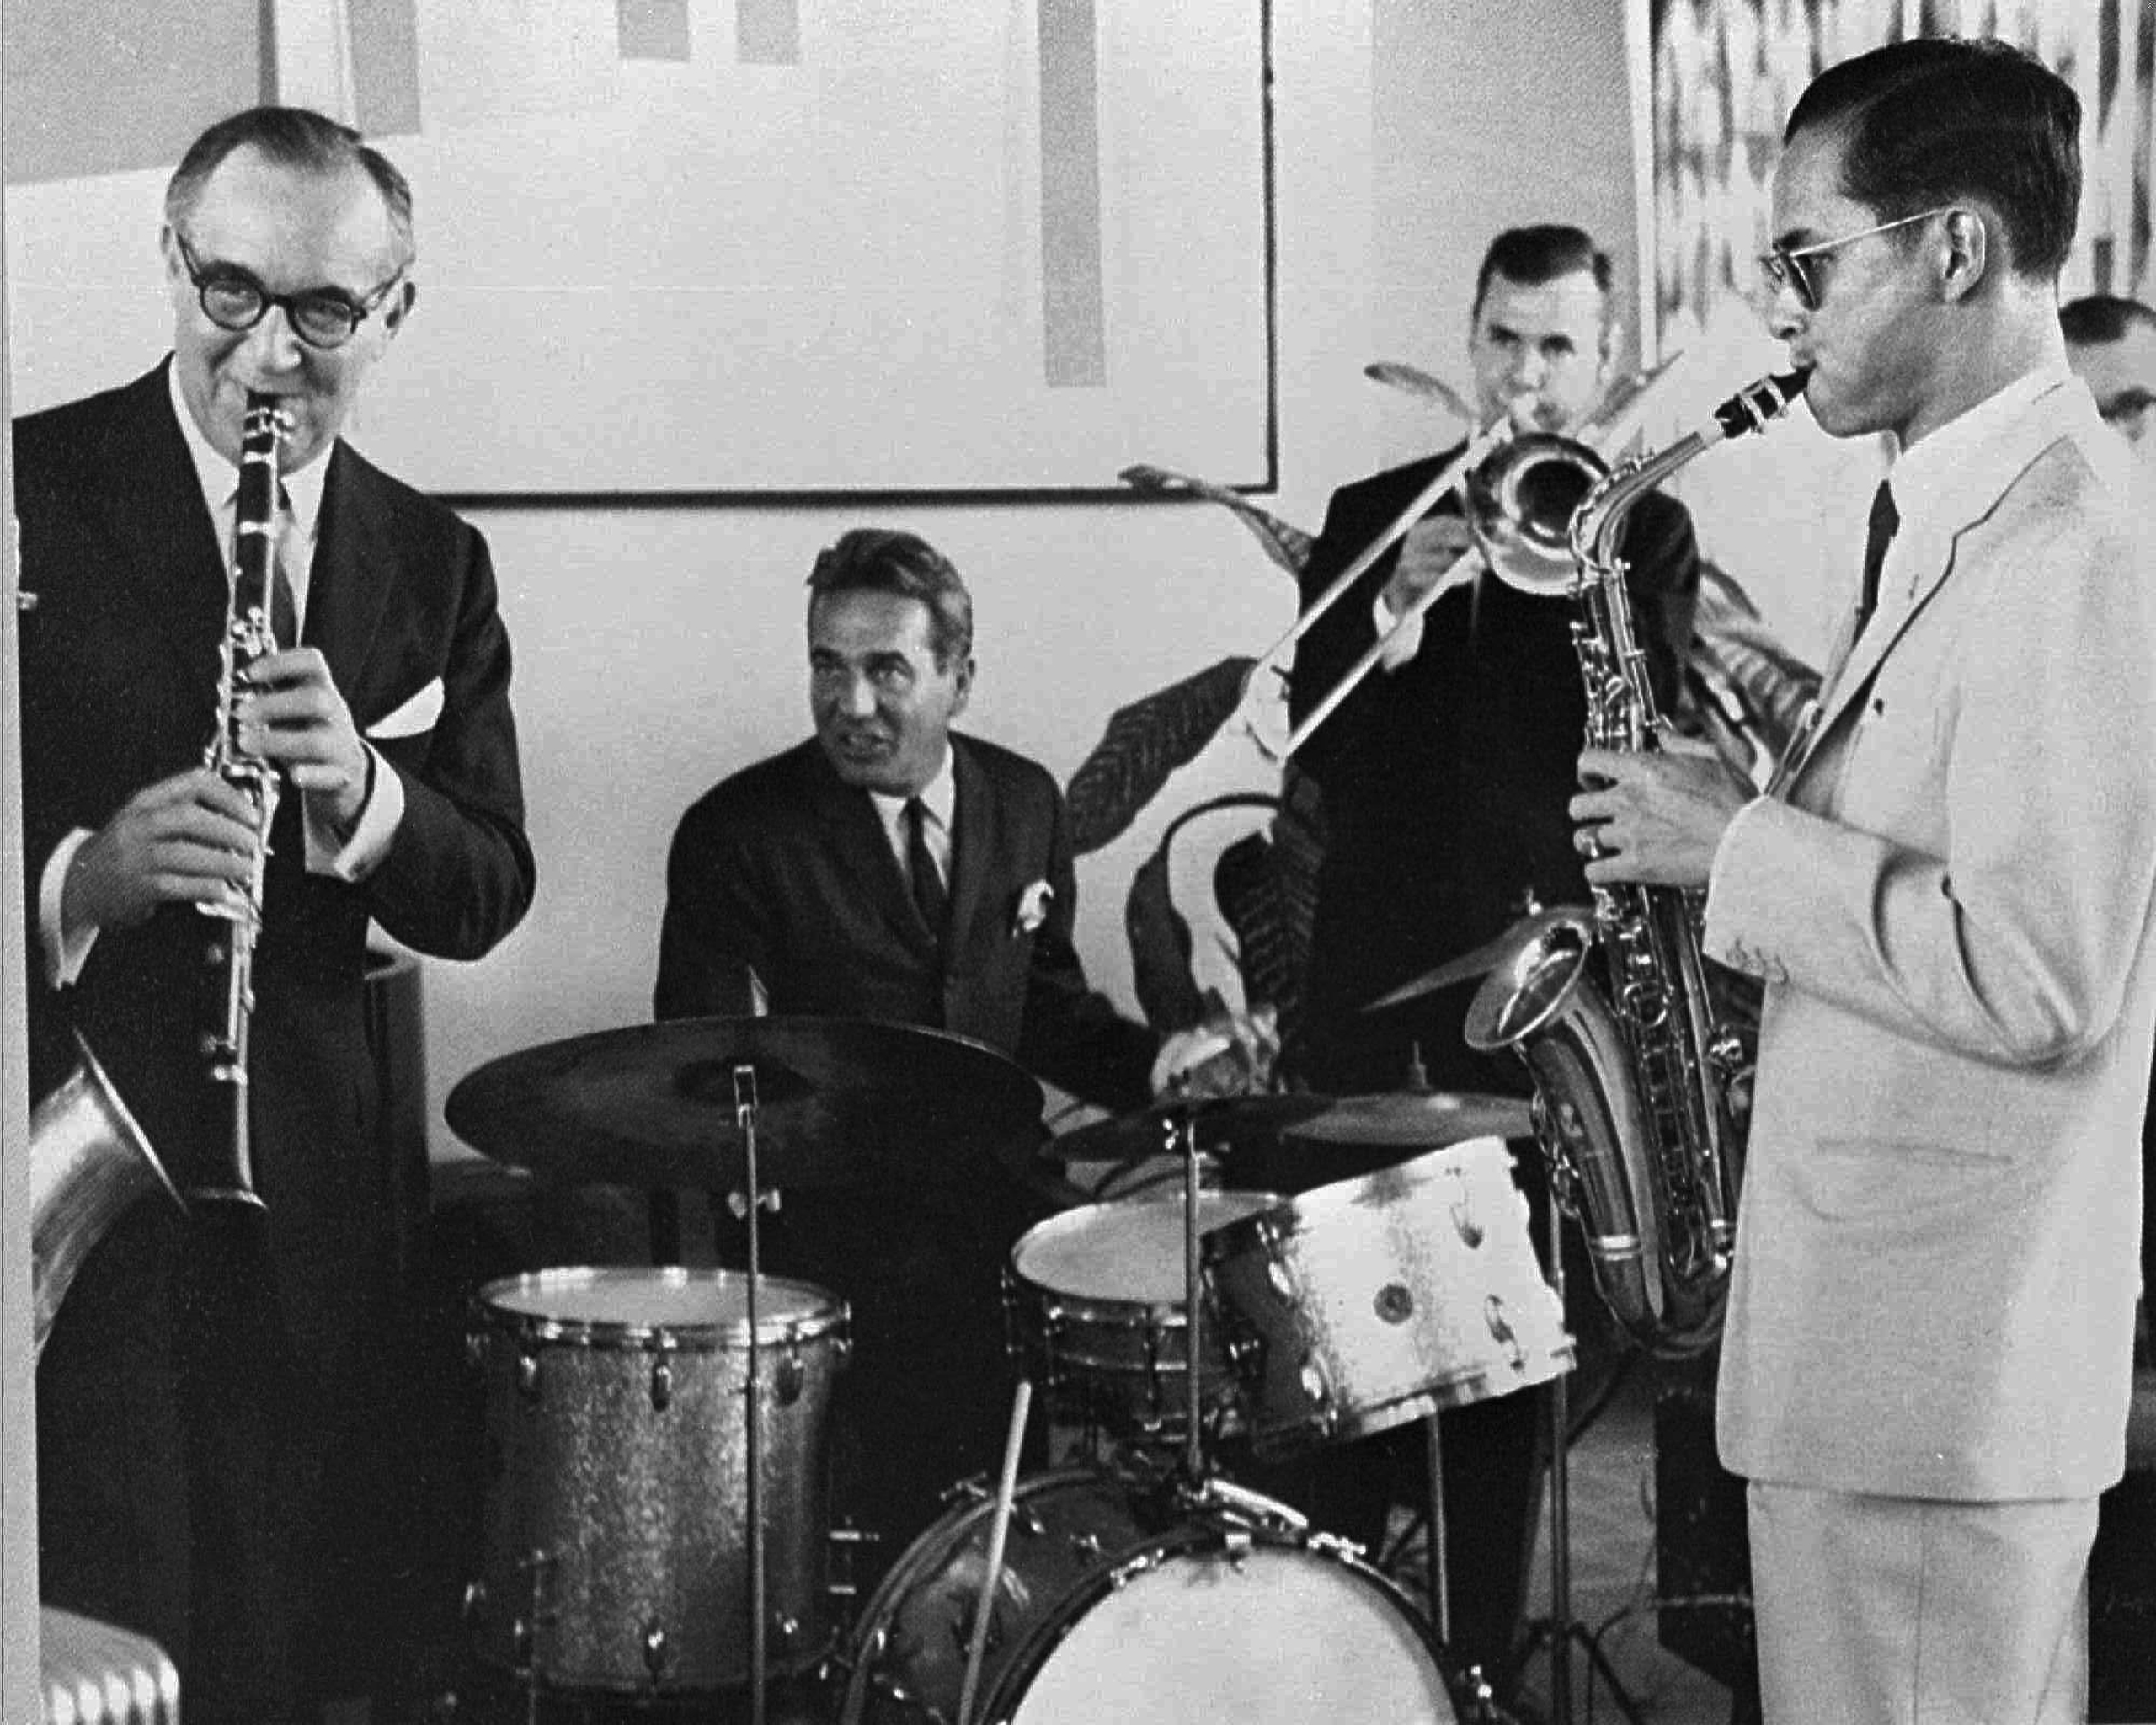 King Bhumibol Adulyadej, far right, plays the saxophone during a jam session with legendary jazz clarinetist Benny Goodman, far left, and his band in New York on July 5, 1960 (AP)